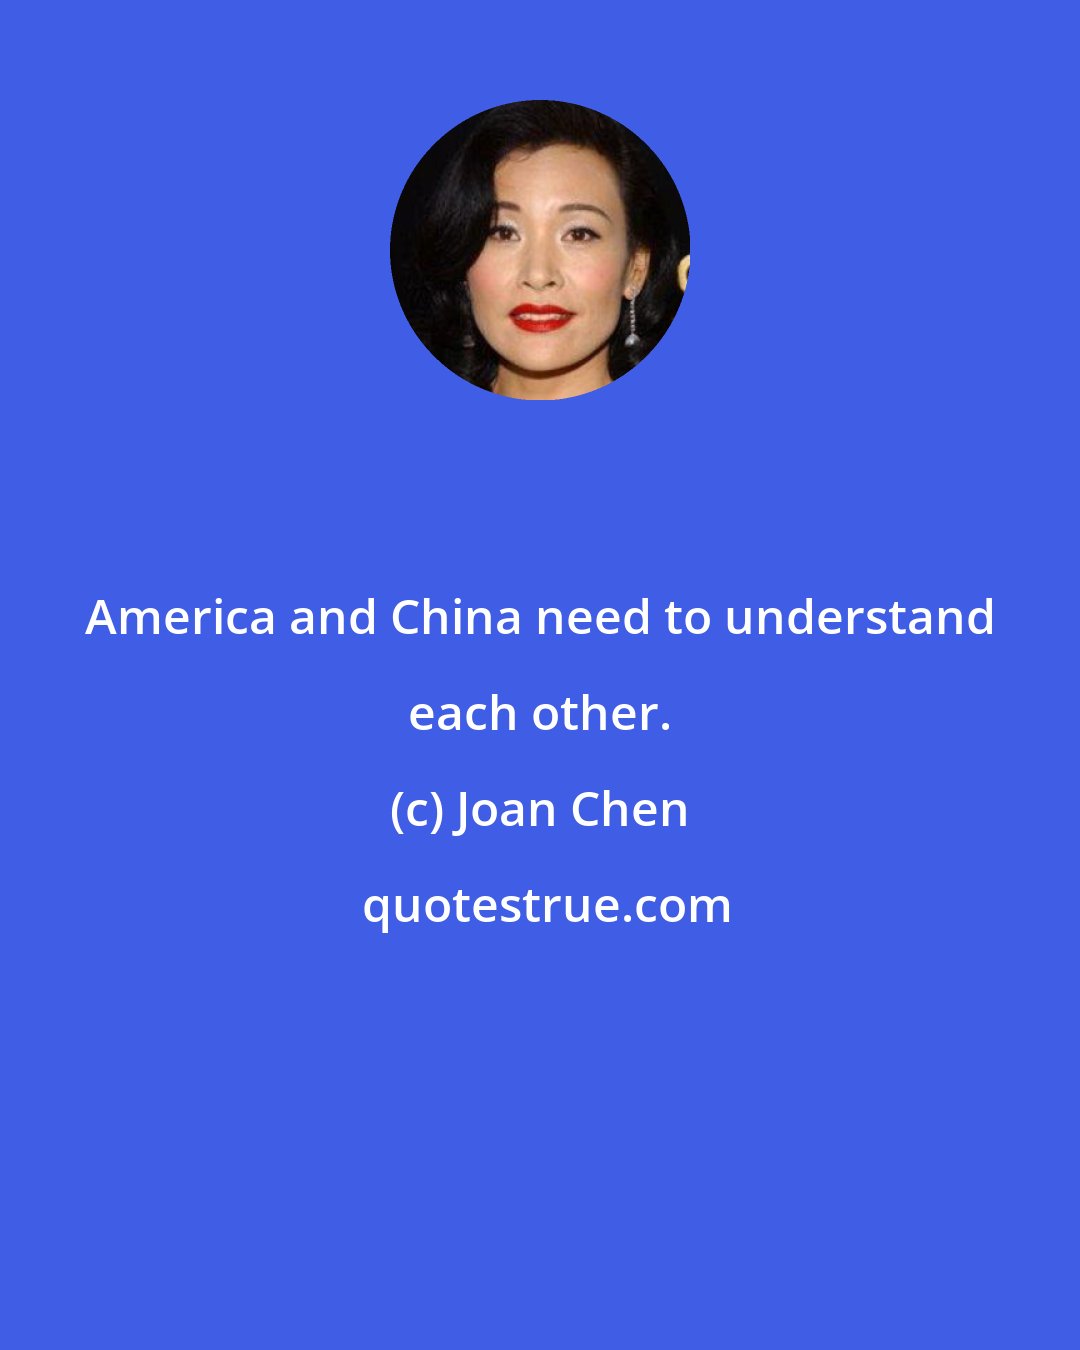 Joan Chen: America and China need to understand each other.